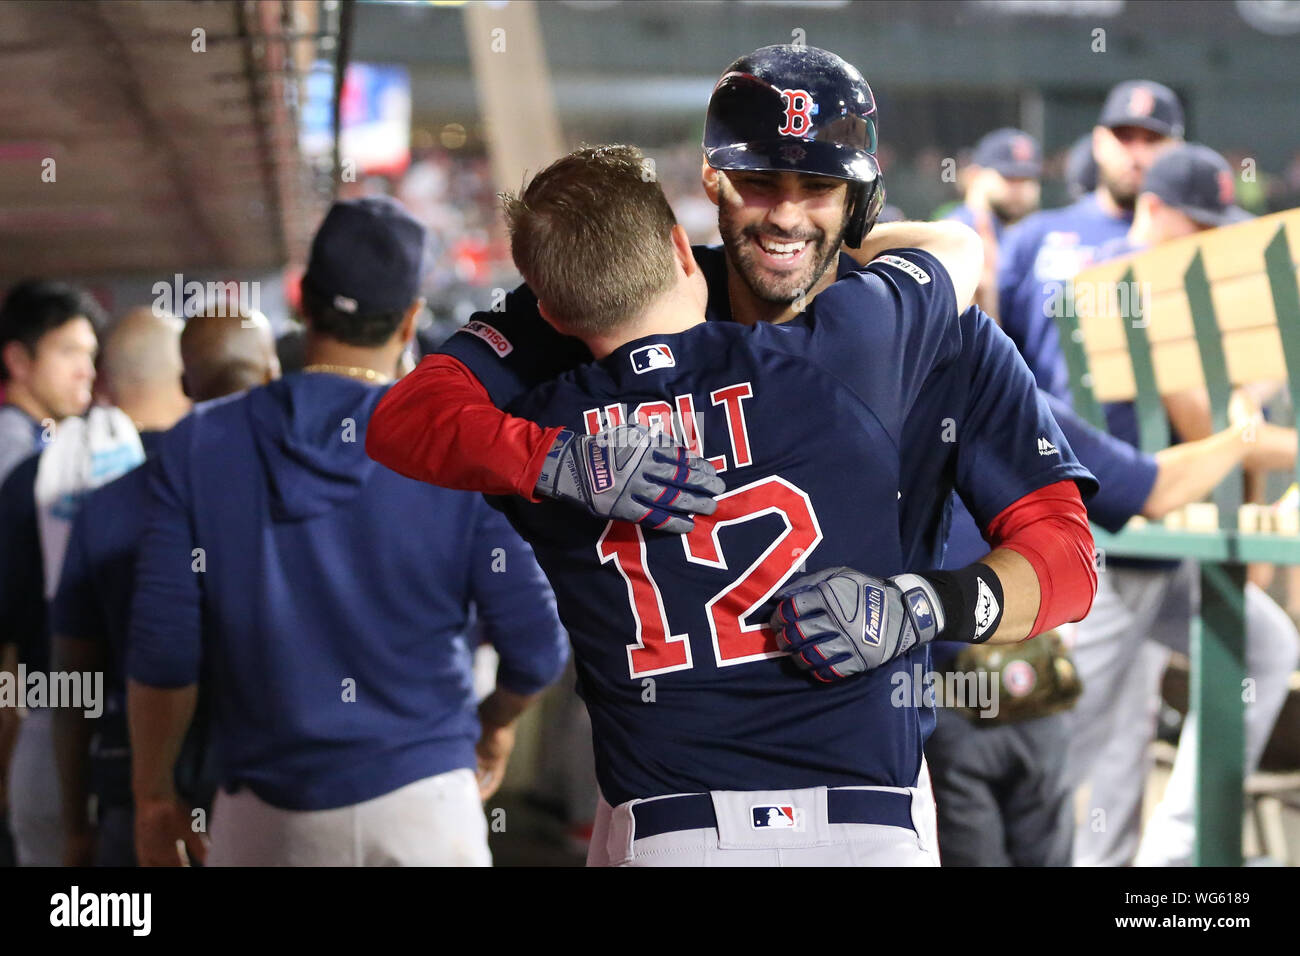 August 30, 2019: Boston Red Sox left fielder J.D. Martinez (28) gets a big hug from Boston Red Sox second baseman Brock Holt (12) following his homer during the game between the Boston Red Sox and the Los Angeles Angels of Anaheim at Angel Stadium in Anaheim, CA, (Photo by Peter Joneleit, Cal Sport Media) Stock Photo